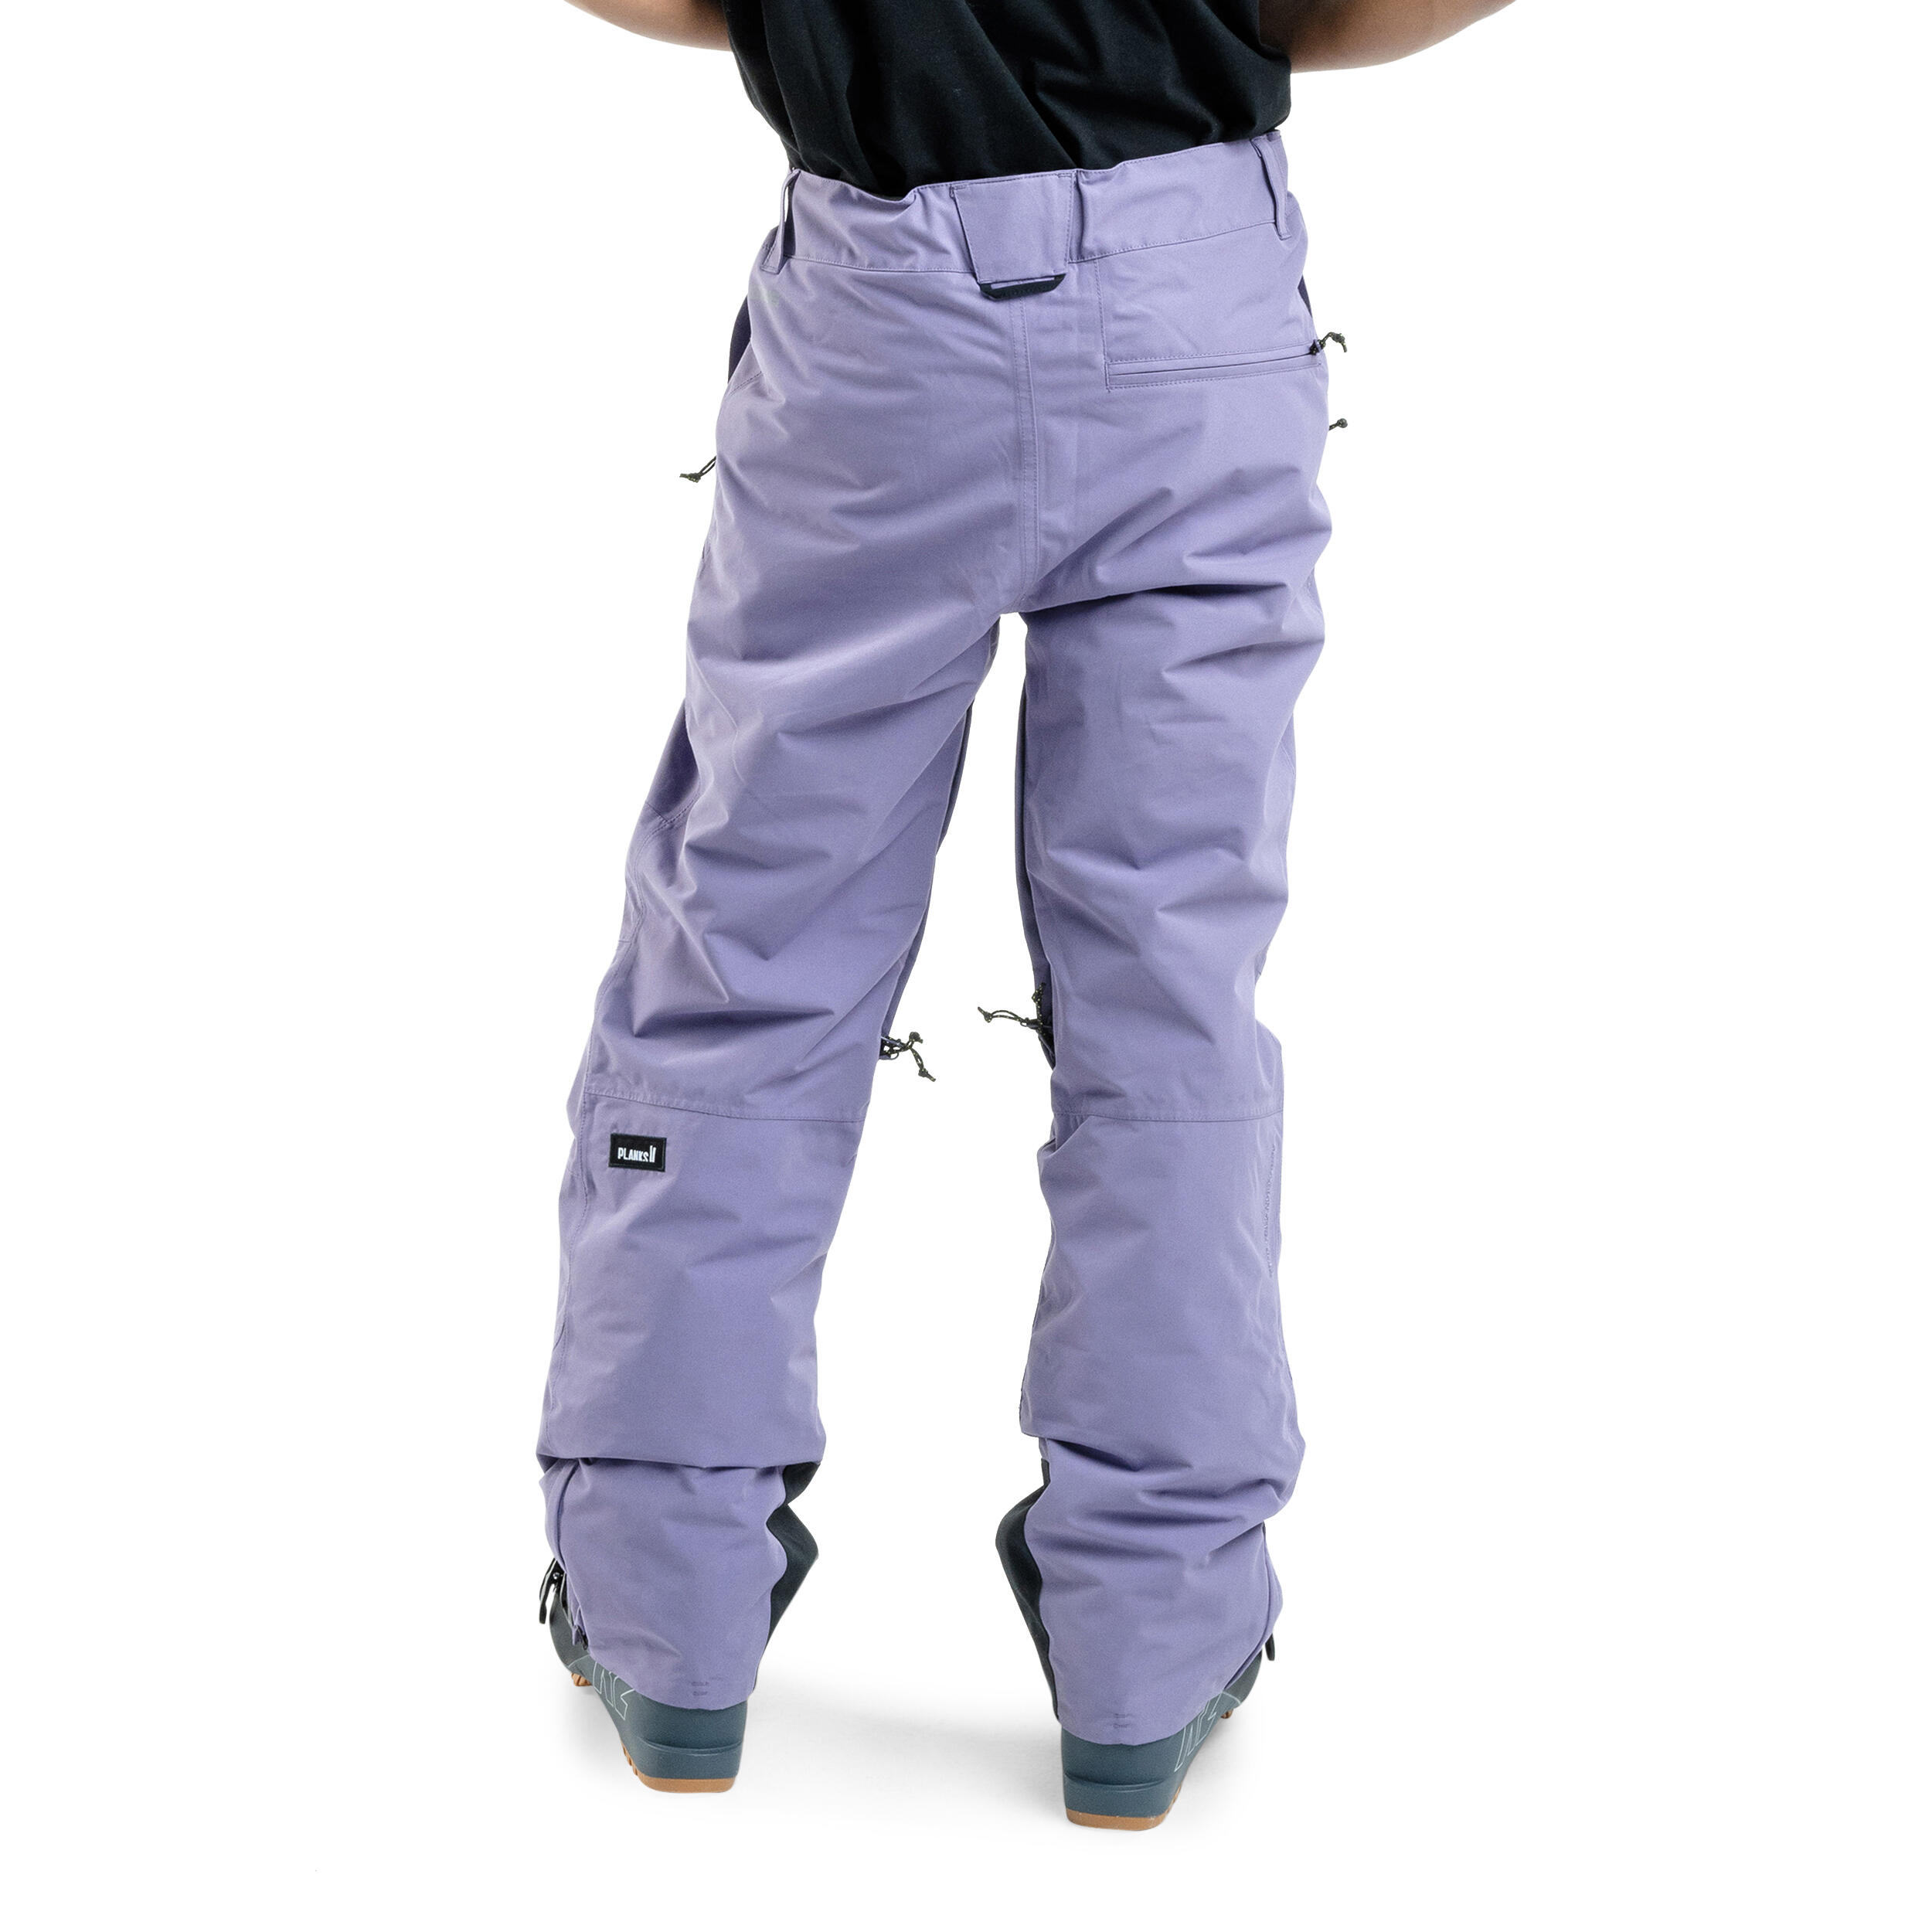 Planks Easy Rider Men's Ski Pants in Steep Purple with Pockets - Sports Trousers 3/4